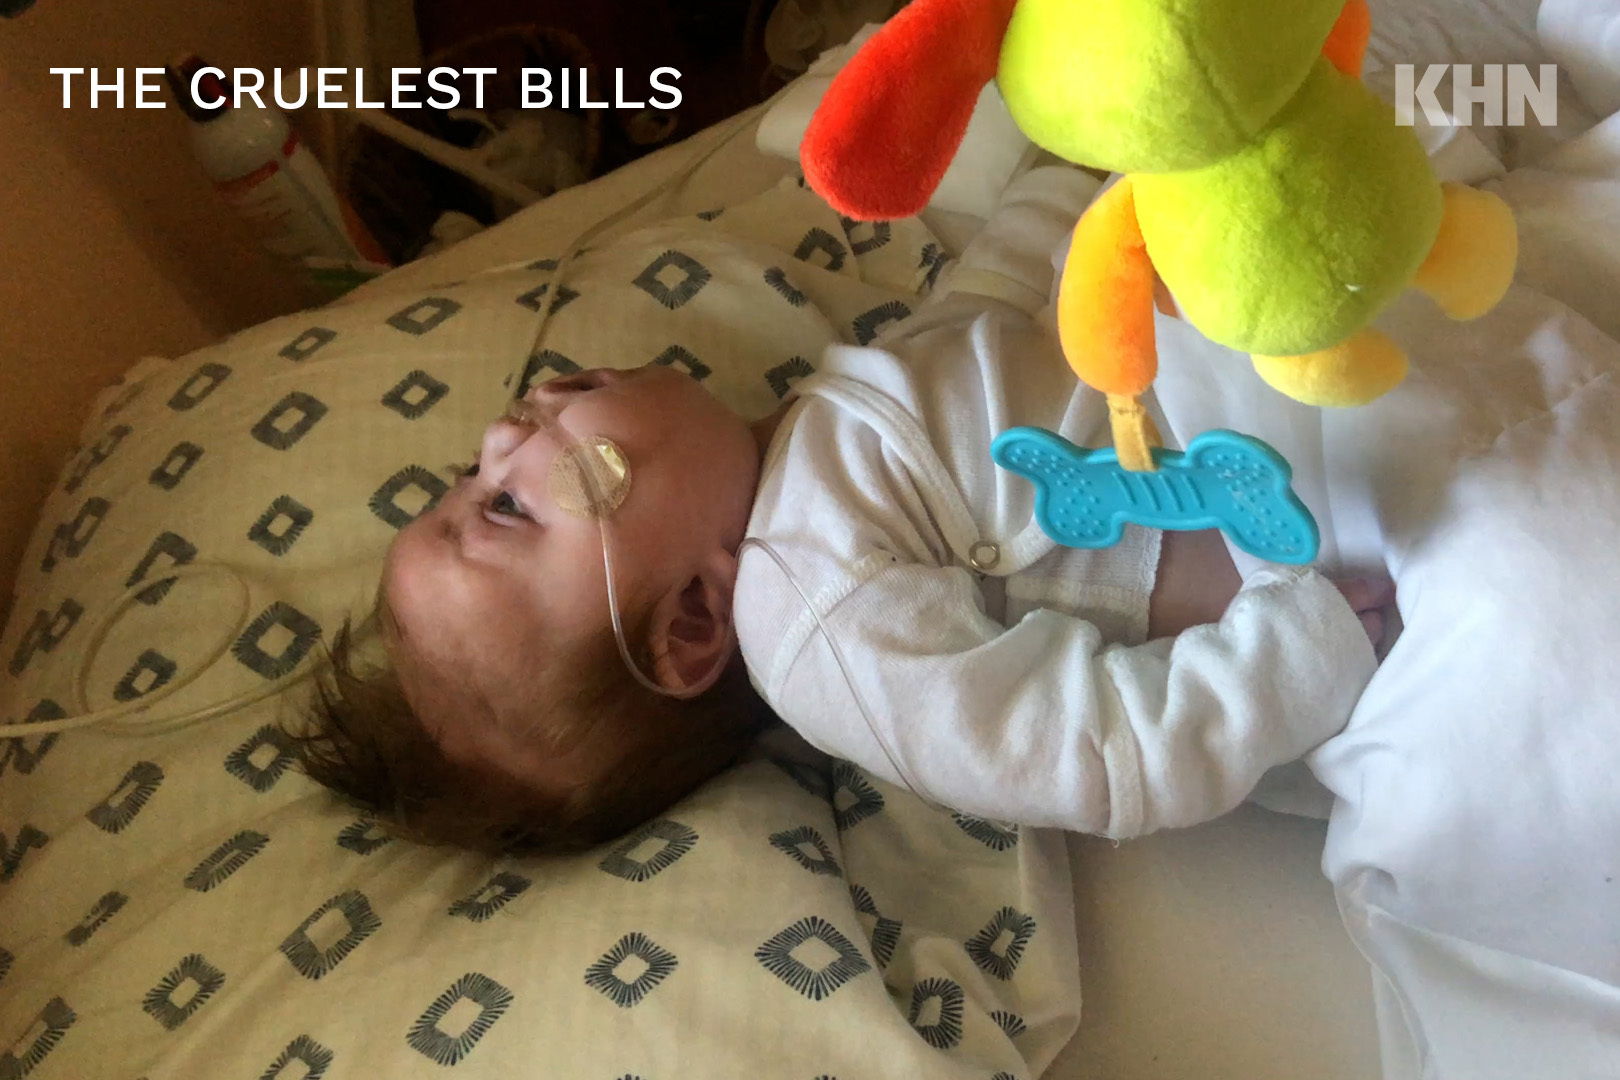 Watch: Their Baby Died. The Medical Bills Haunted Them.